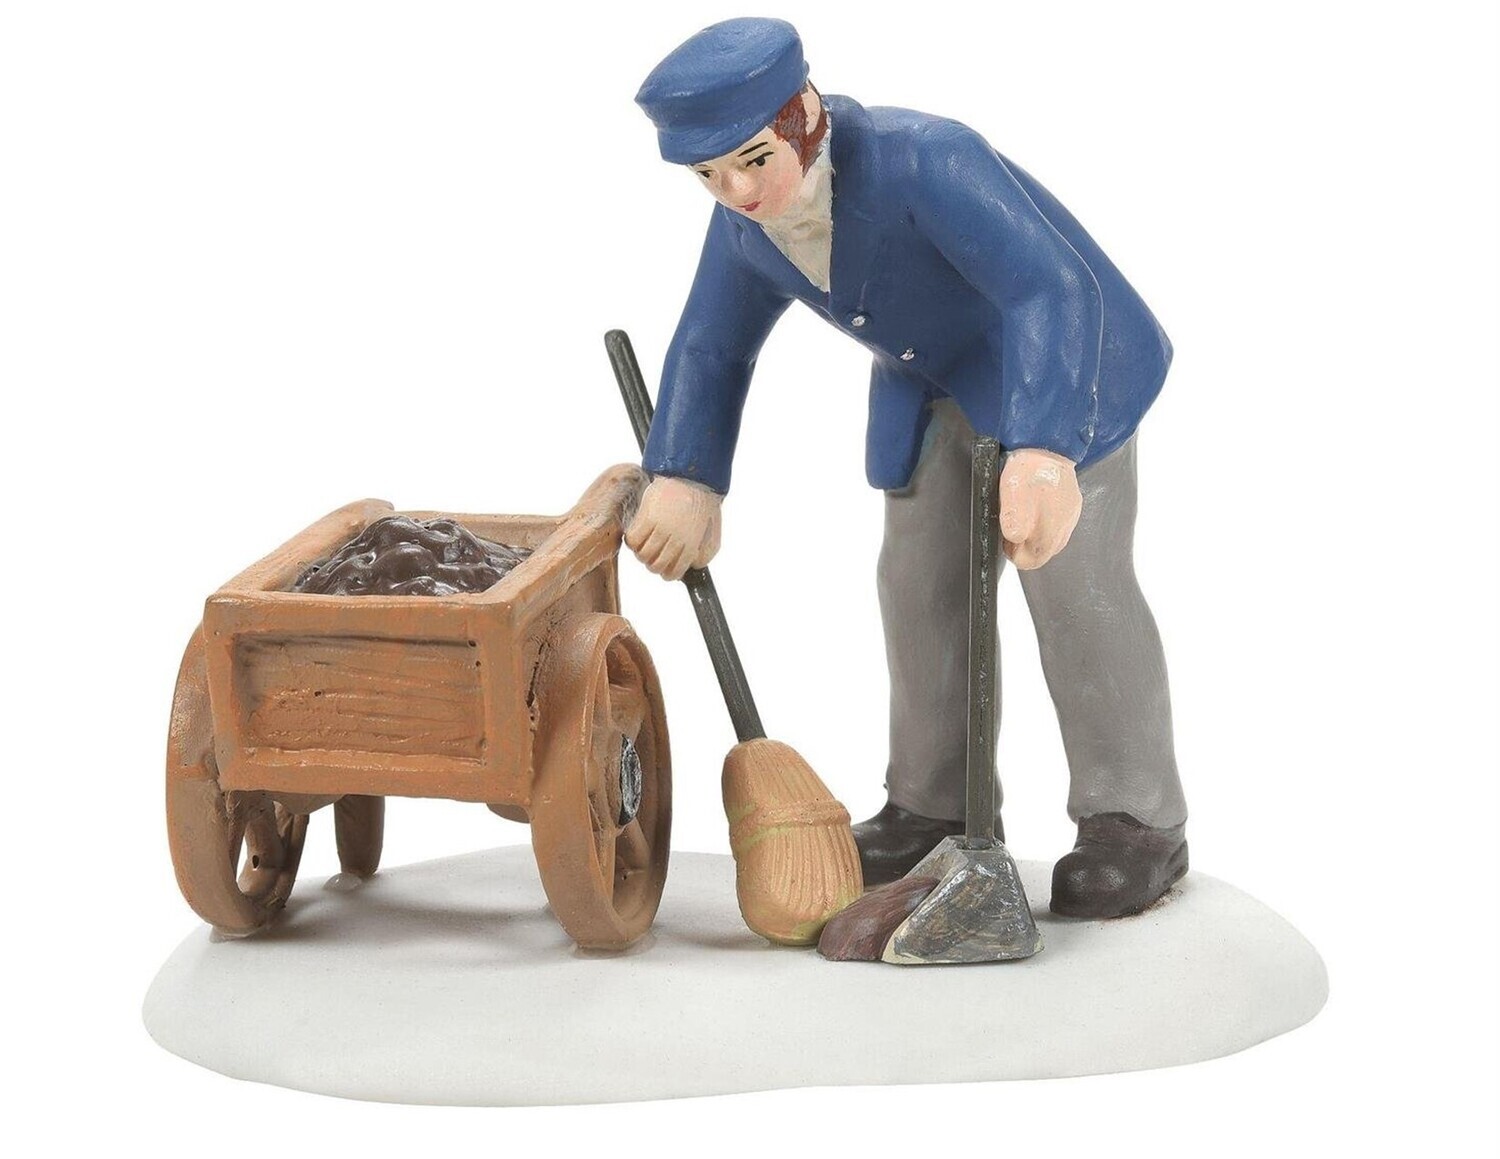 Department 56 Dickens Village "Zoological Society Final Prep Before Opening" Figurine (6011395)